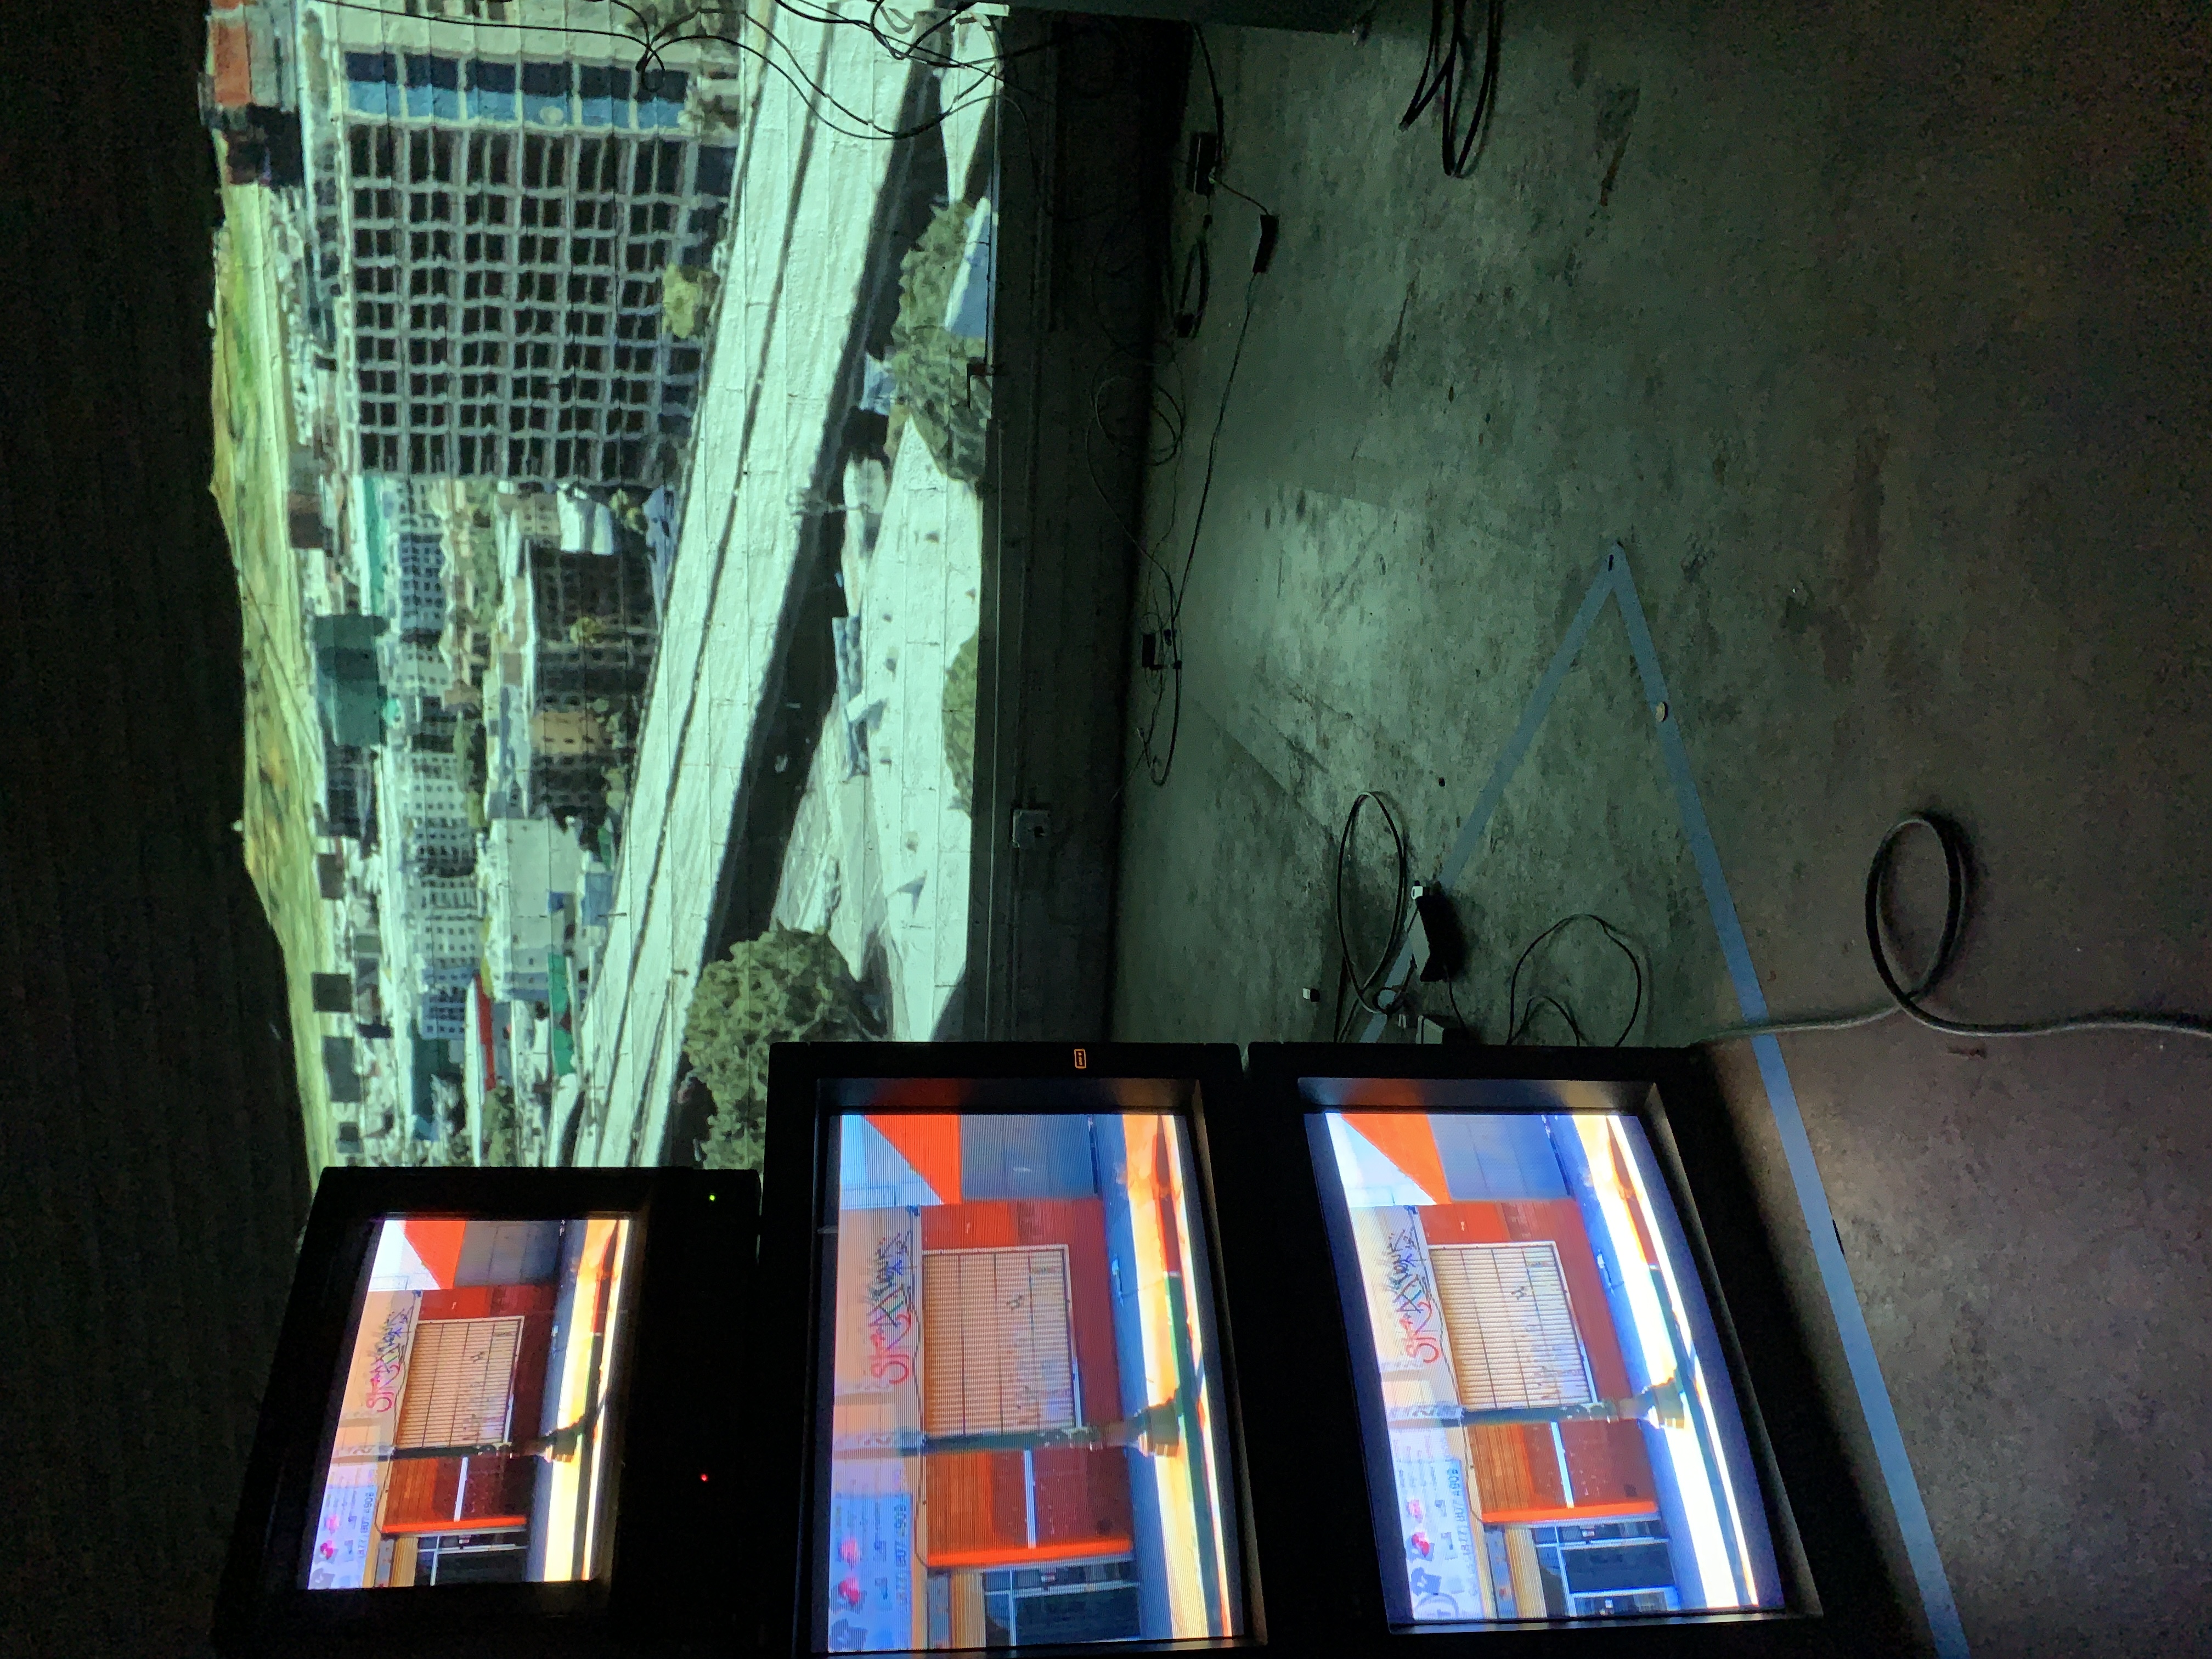 Stacked televisions in the foreground of the image depict an industrial corner in Los Angeles. In the background of the image is a projection of an aerial view of the city. They exist in a dark concrete and brick room.